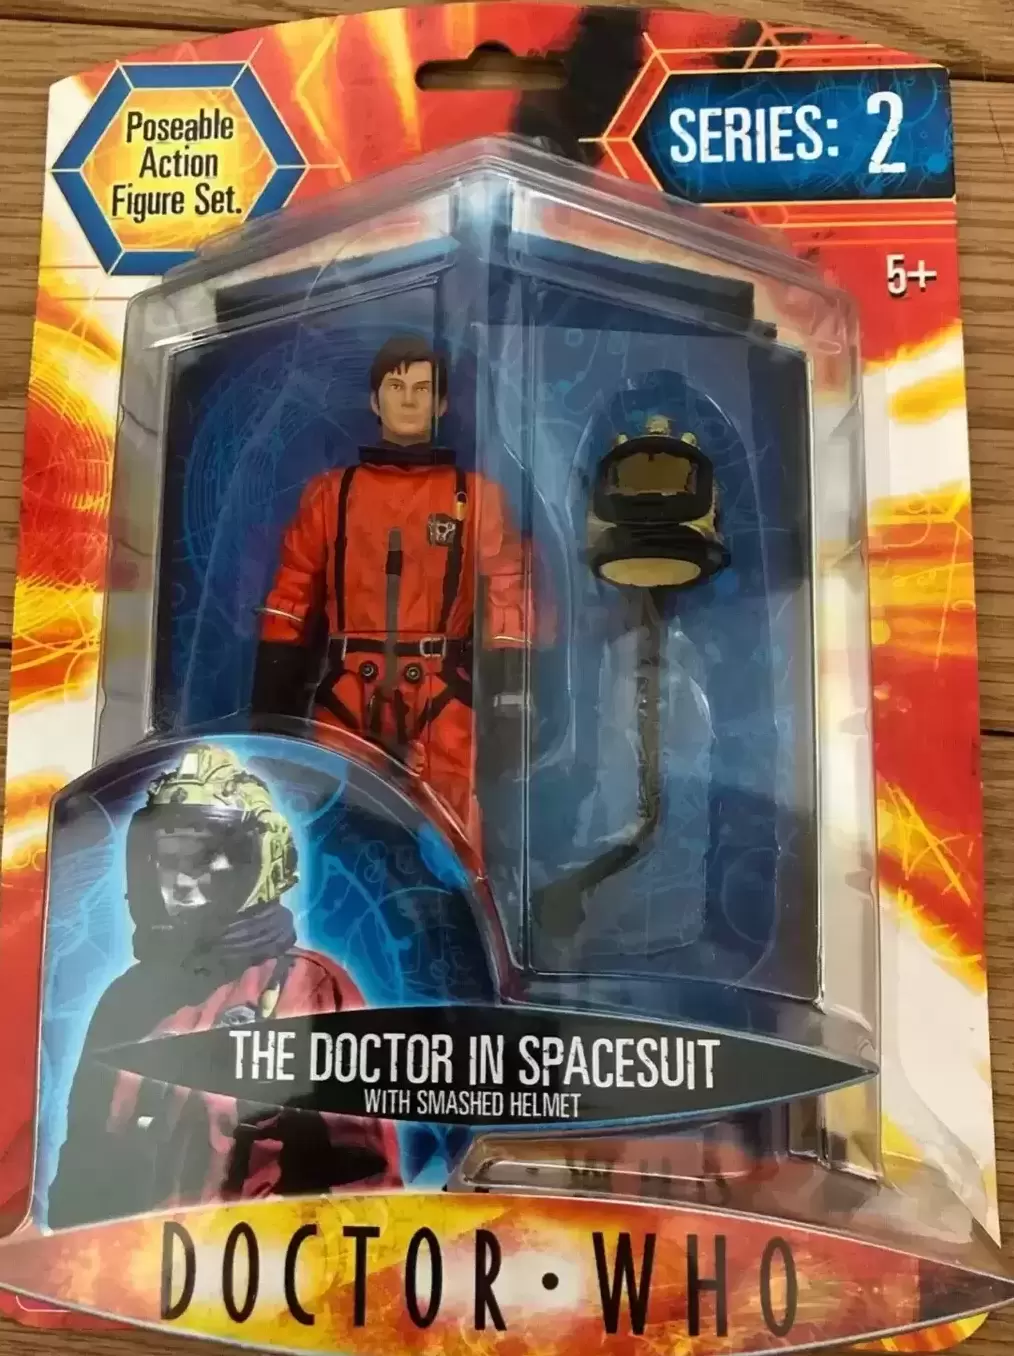 Action Figures - The Doctor in Spacesuit